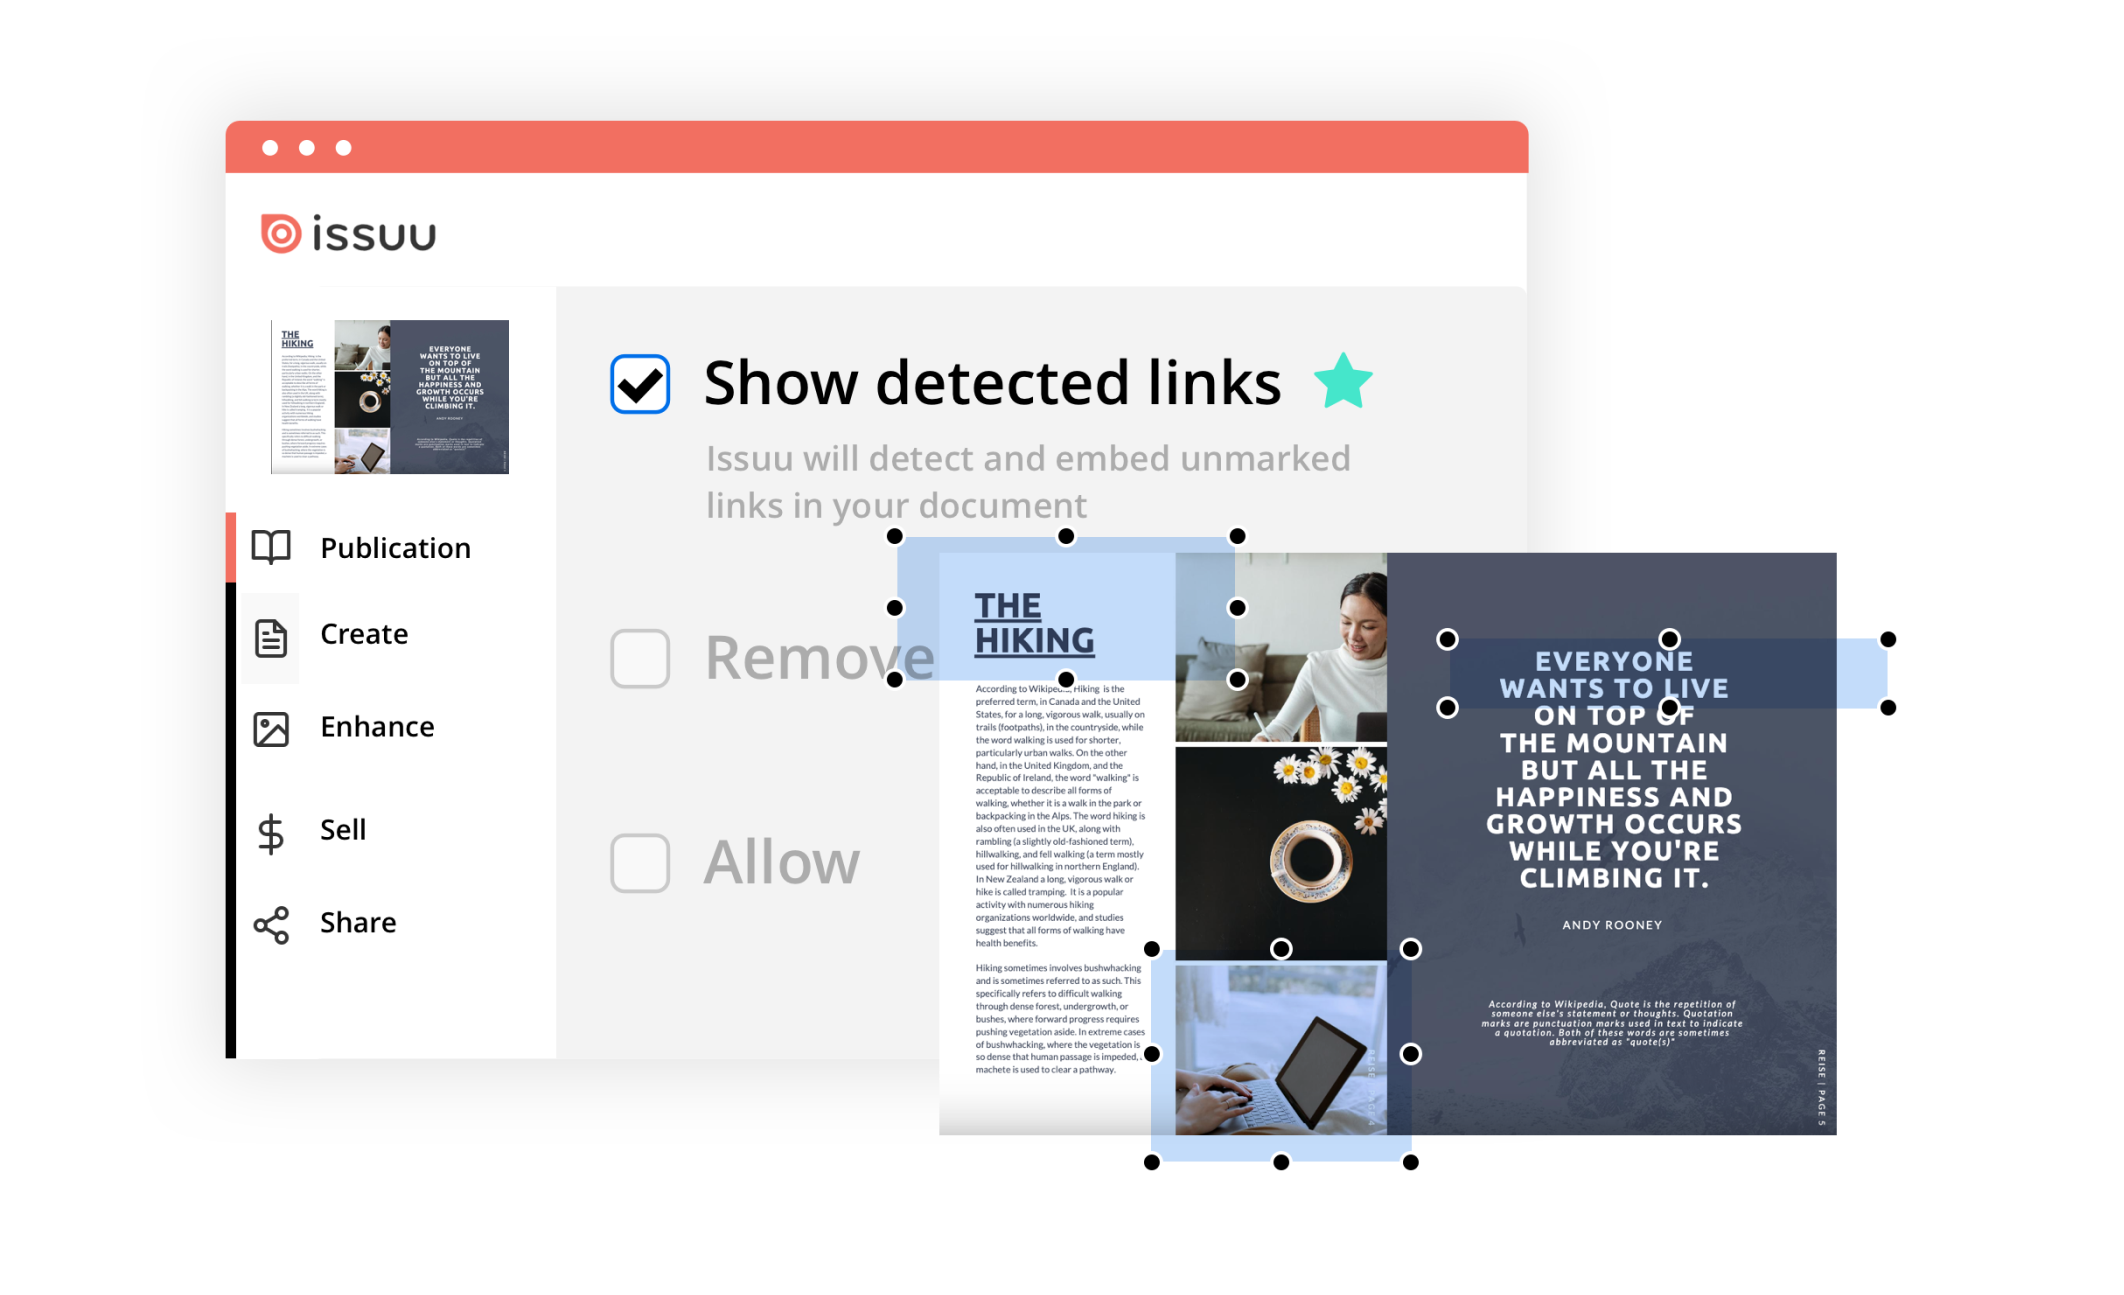 Issuu Software - Detect links automatically, or add them anytime. If your original PDF contains links, they will be automatically activated and become clickable when you upload your PDF to Issuu. If you need to add more links, you can easily do that  in our editor.